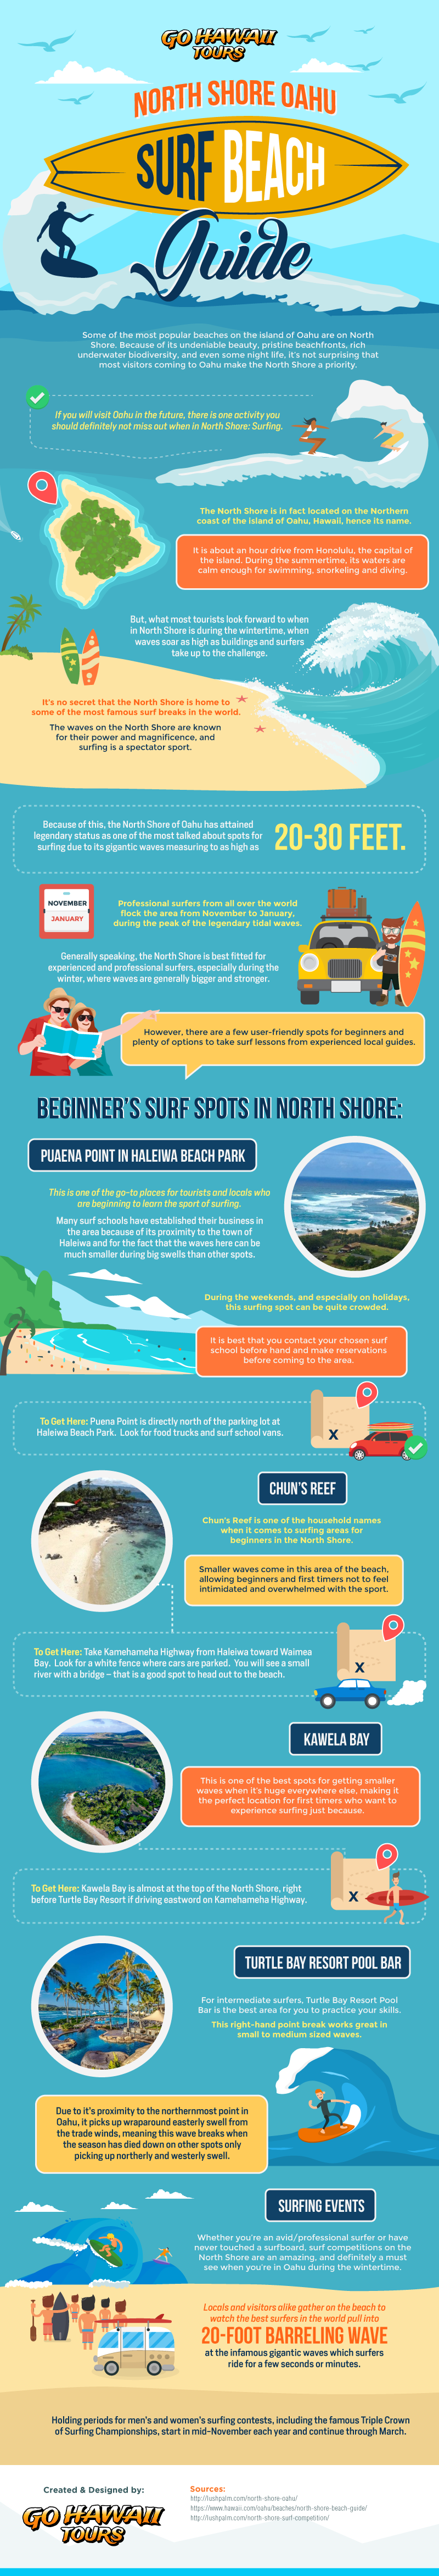 North-Shore-Oahu-Surf-Beach-Guide-Infographic-image